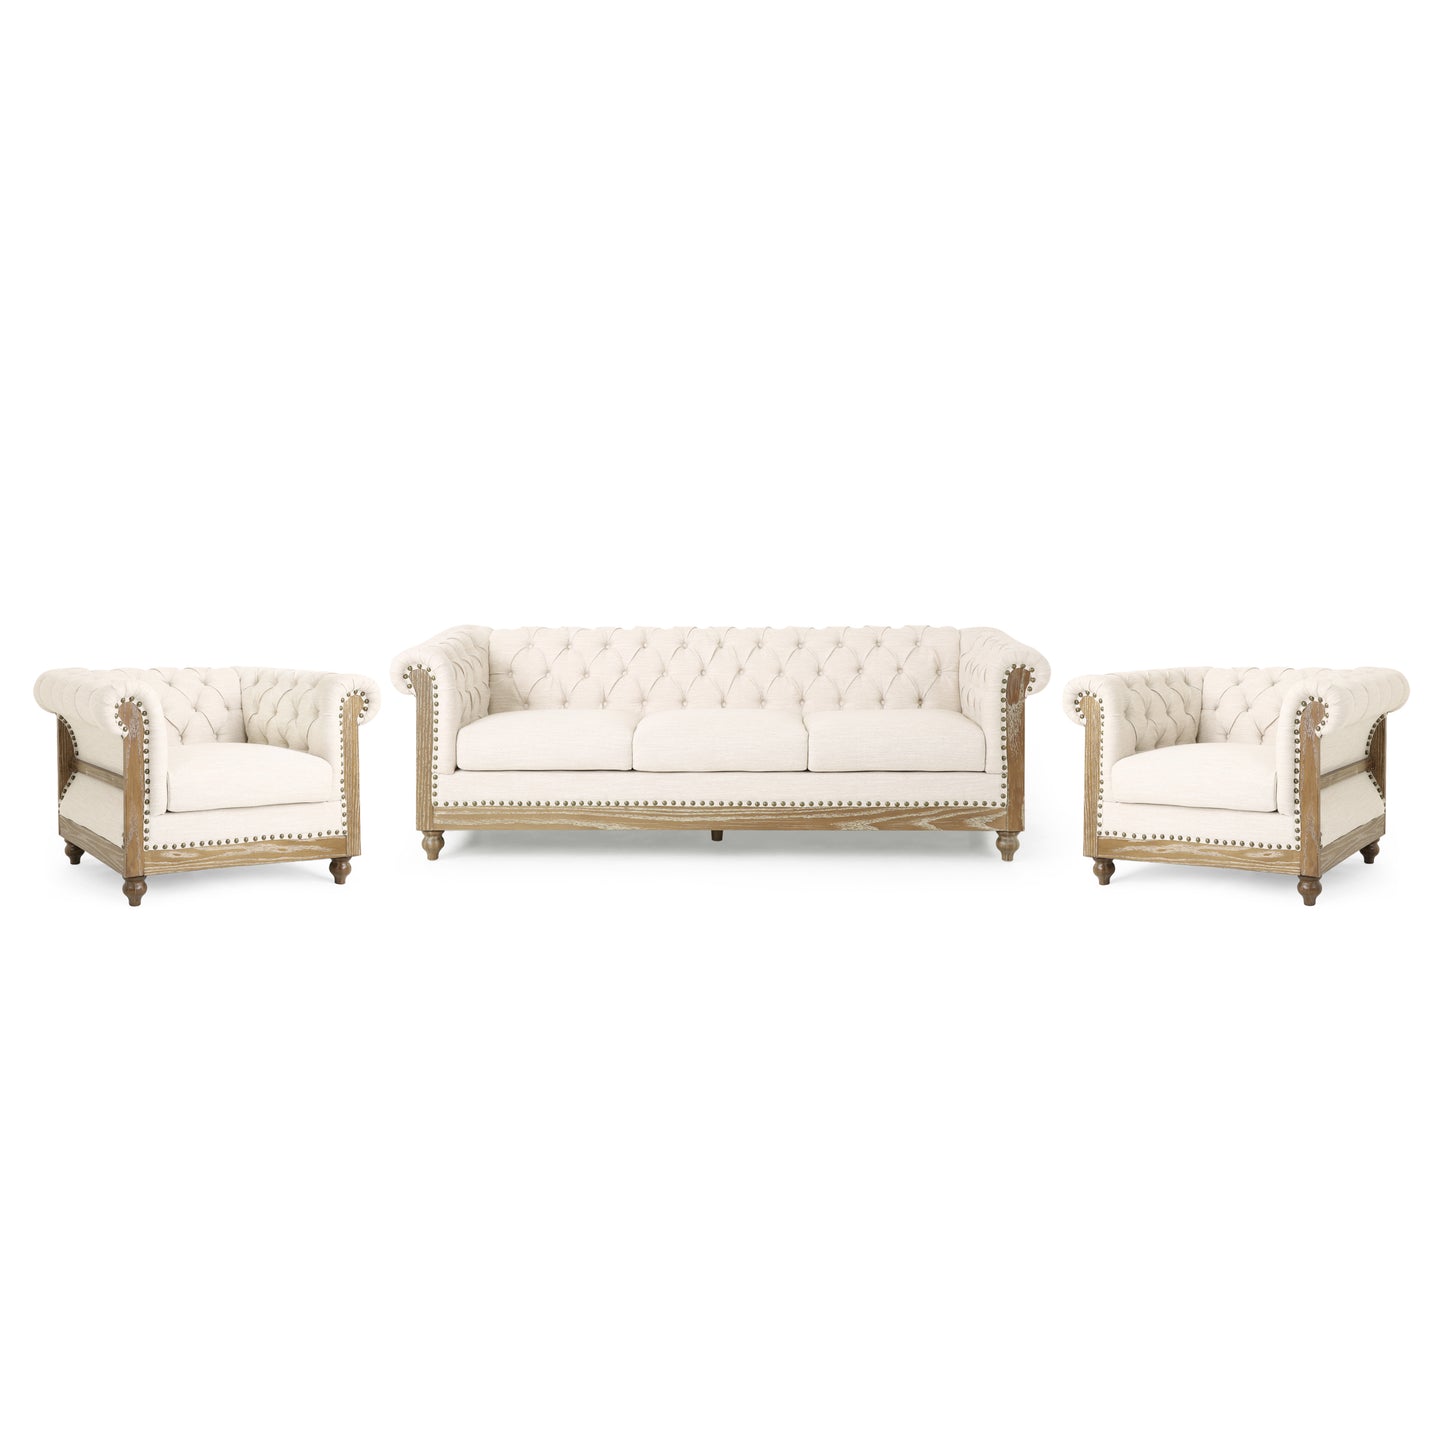 Alejandro Chesterfield Tufted 3 Piece Living Room Set with Nailhead Trim